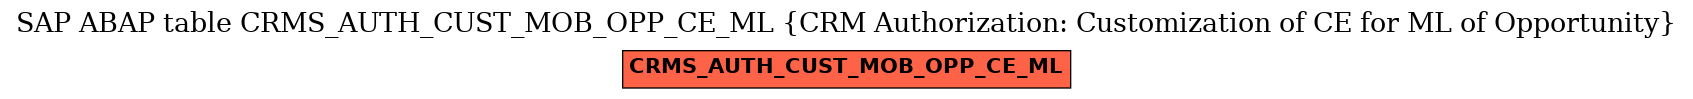 E-R Diagram for table CRMS_AUTH_CUST_MOB_OPP_CE_ML (CRM Authorization: Customization of CE for ML of Opportunity)